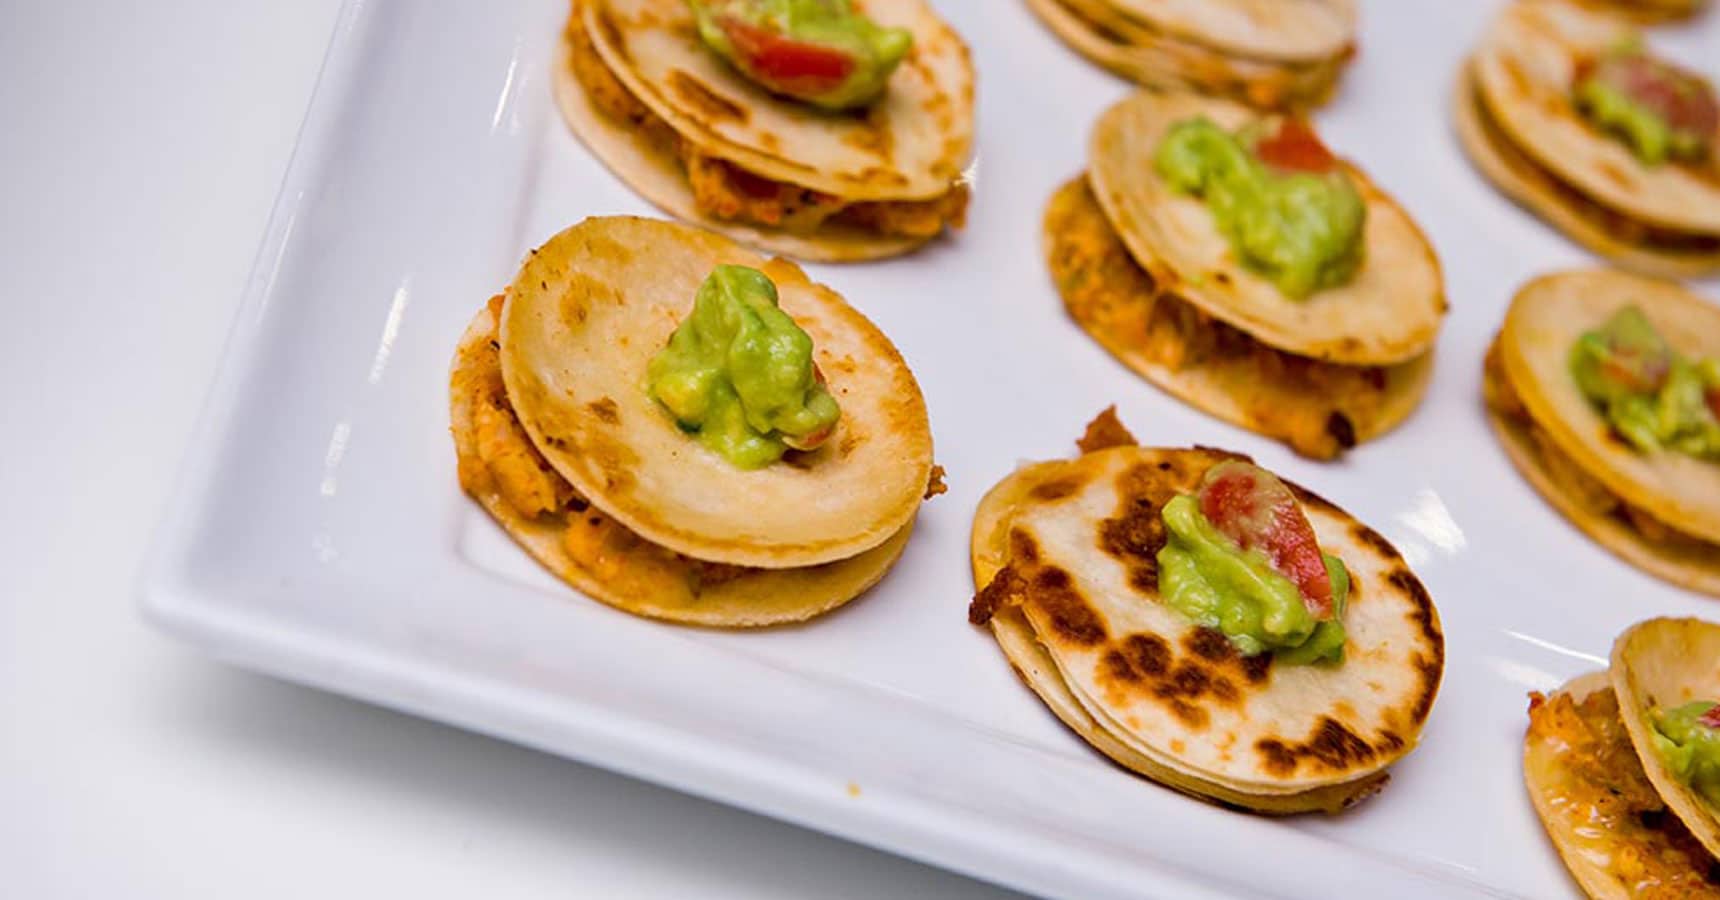 blackened chicken quesadilla by Crave Catering